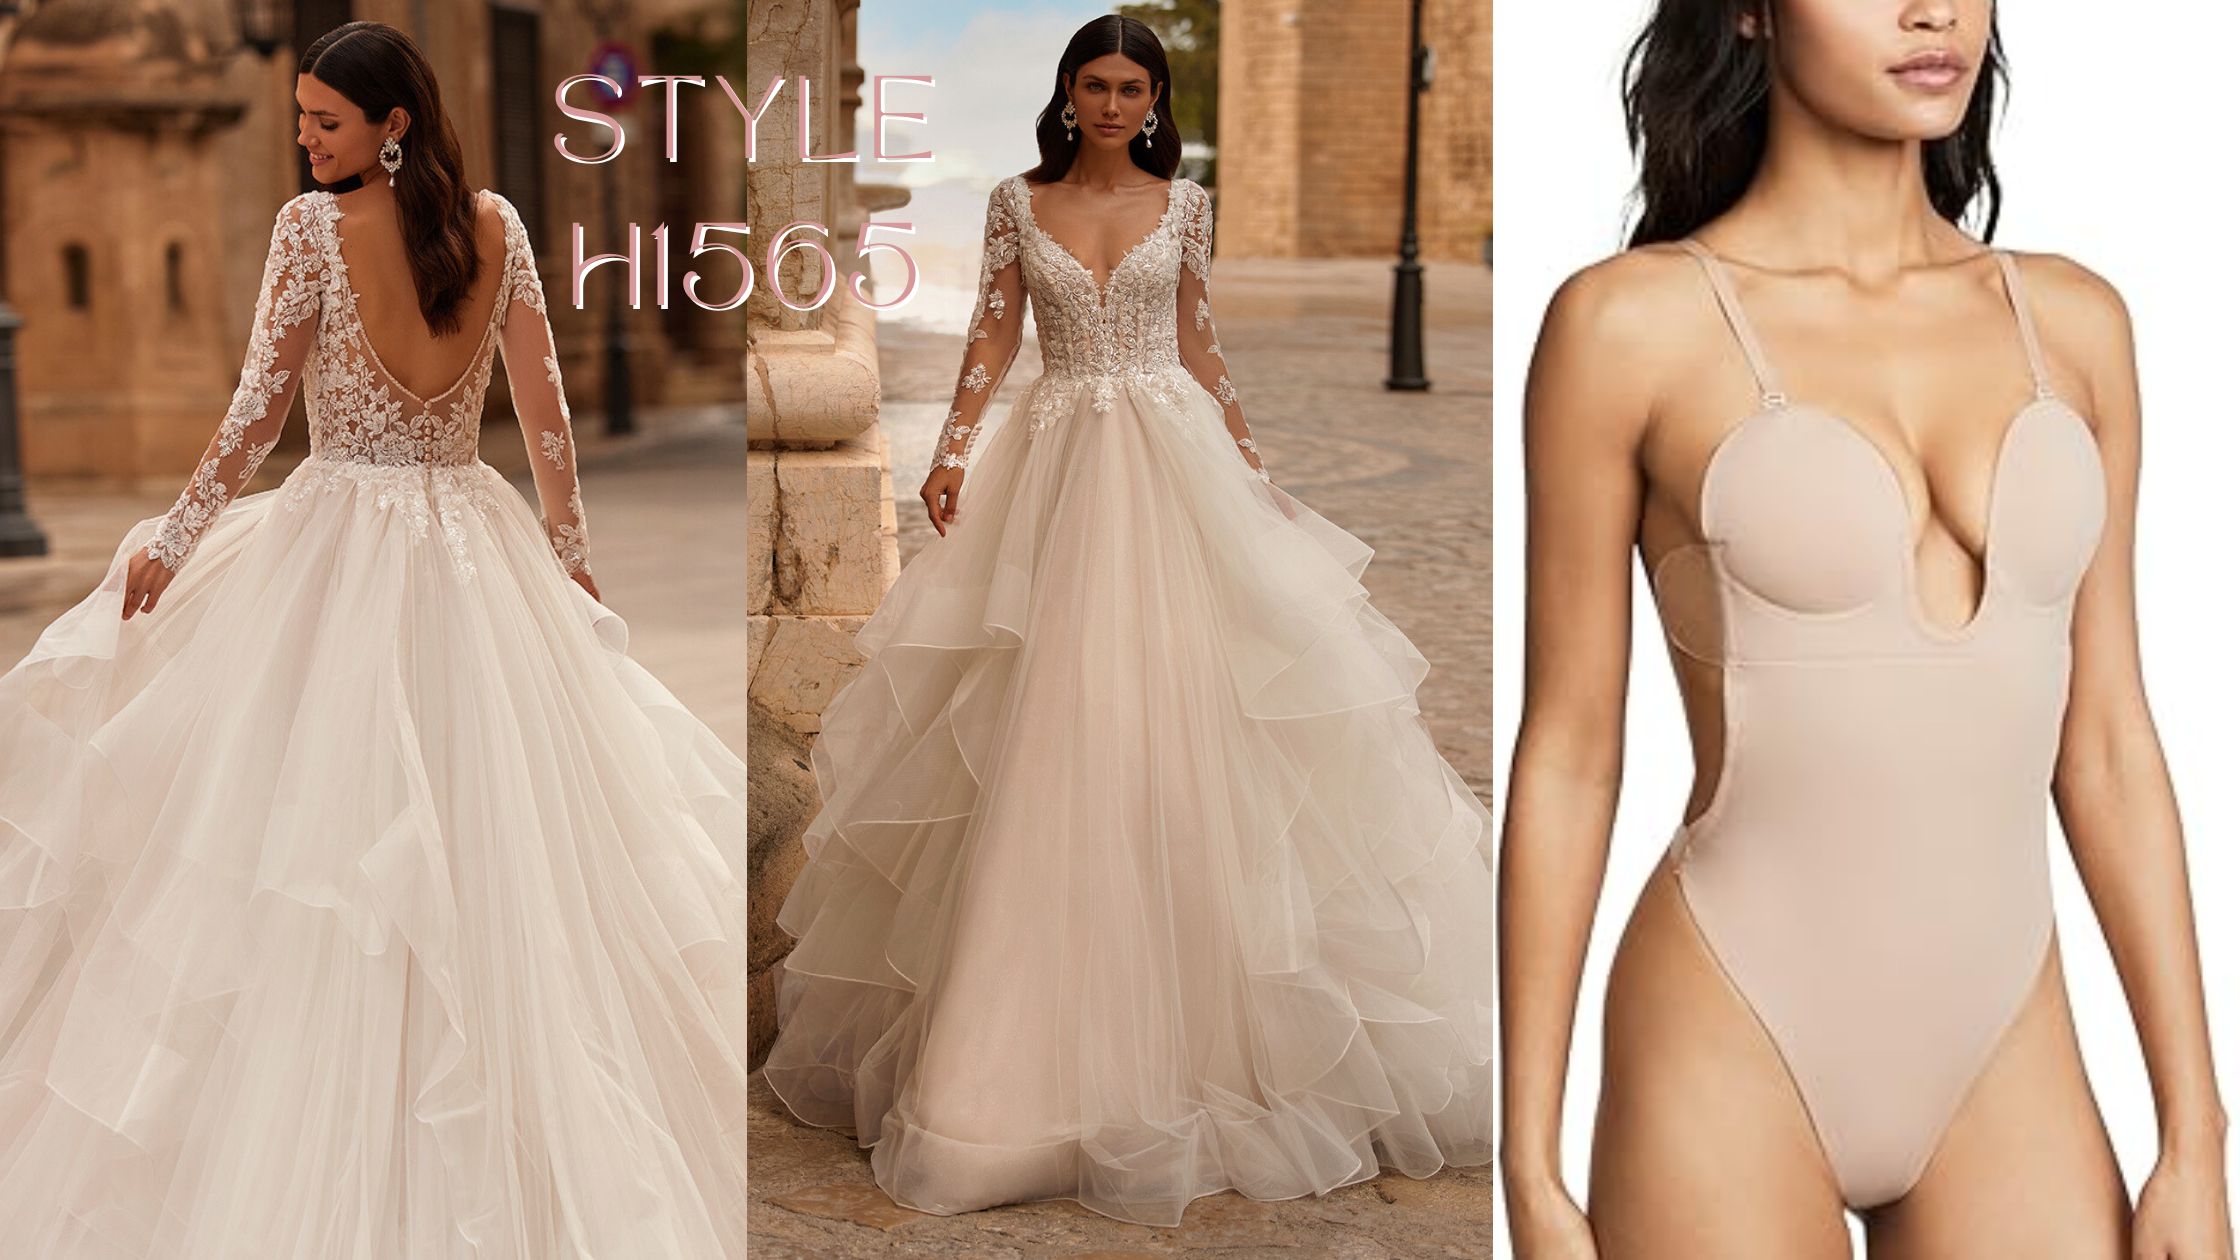 Bridal trend: Extremely revealing, low-cut wedding gowns - Boing